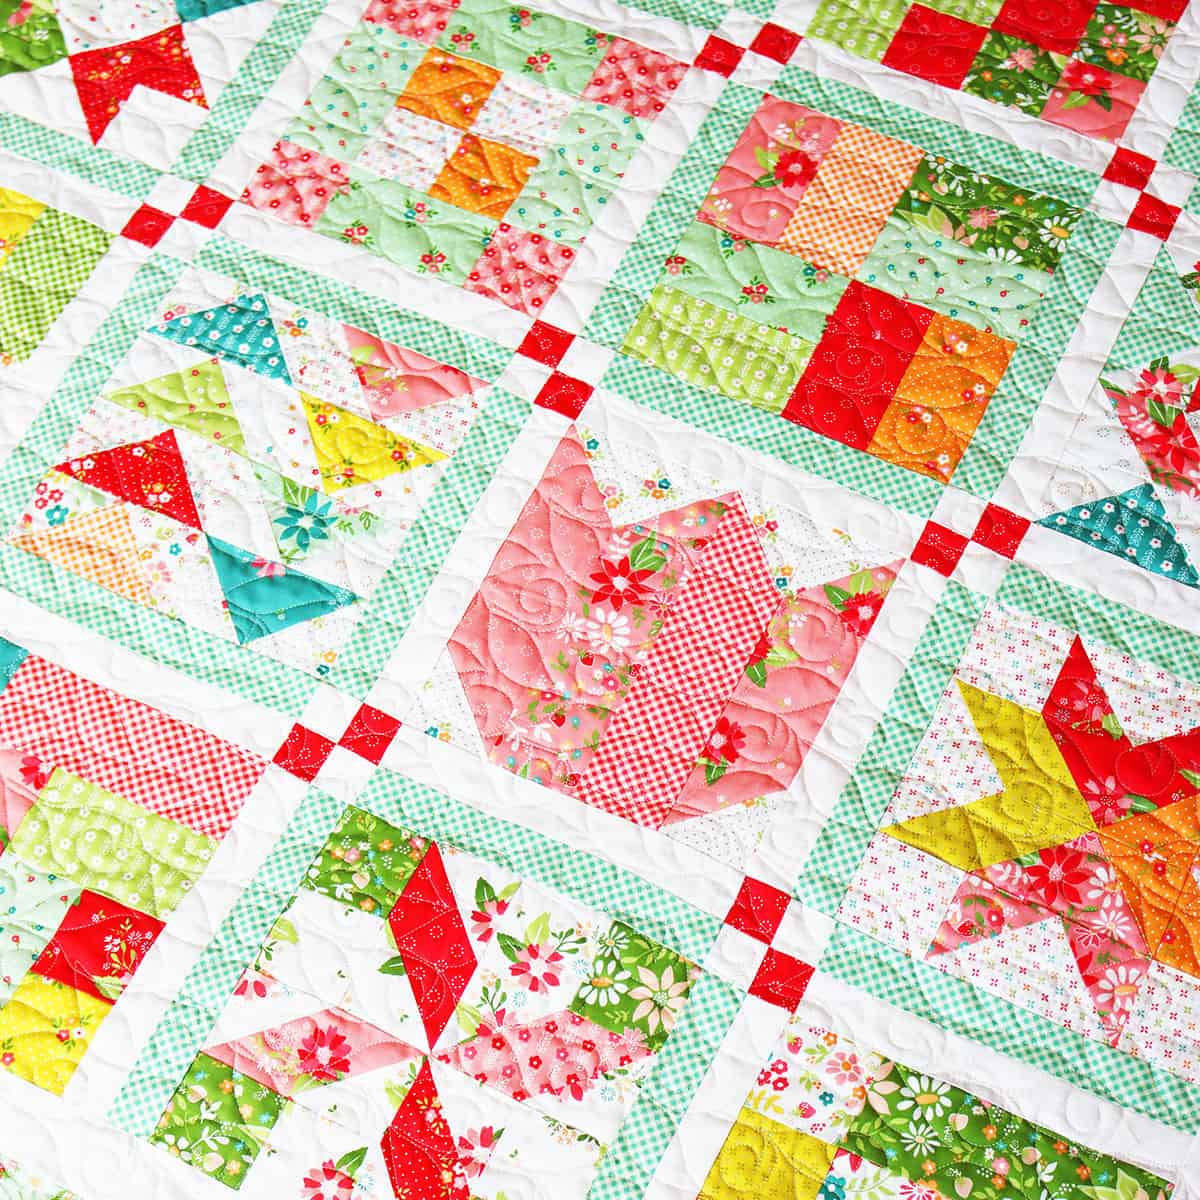 Jelly Roll Sampler Patchwork Quilt in bright colors